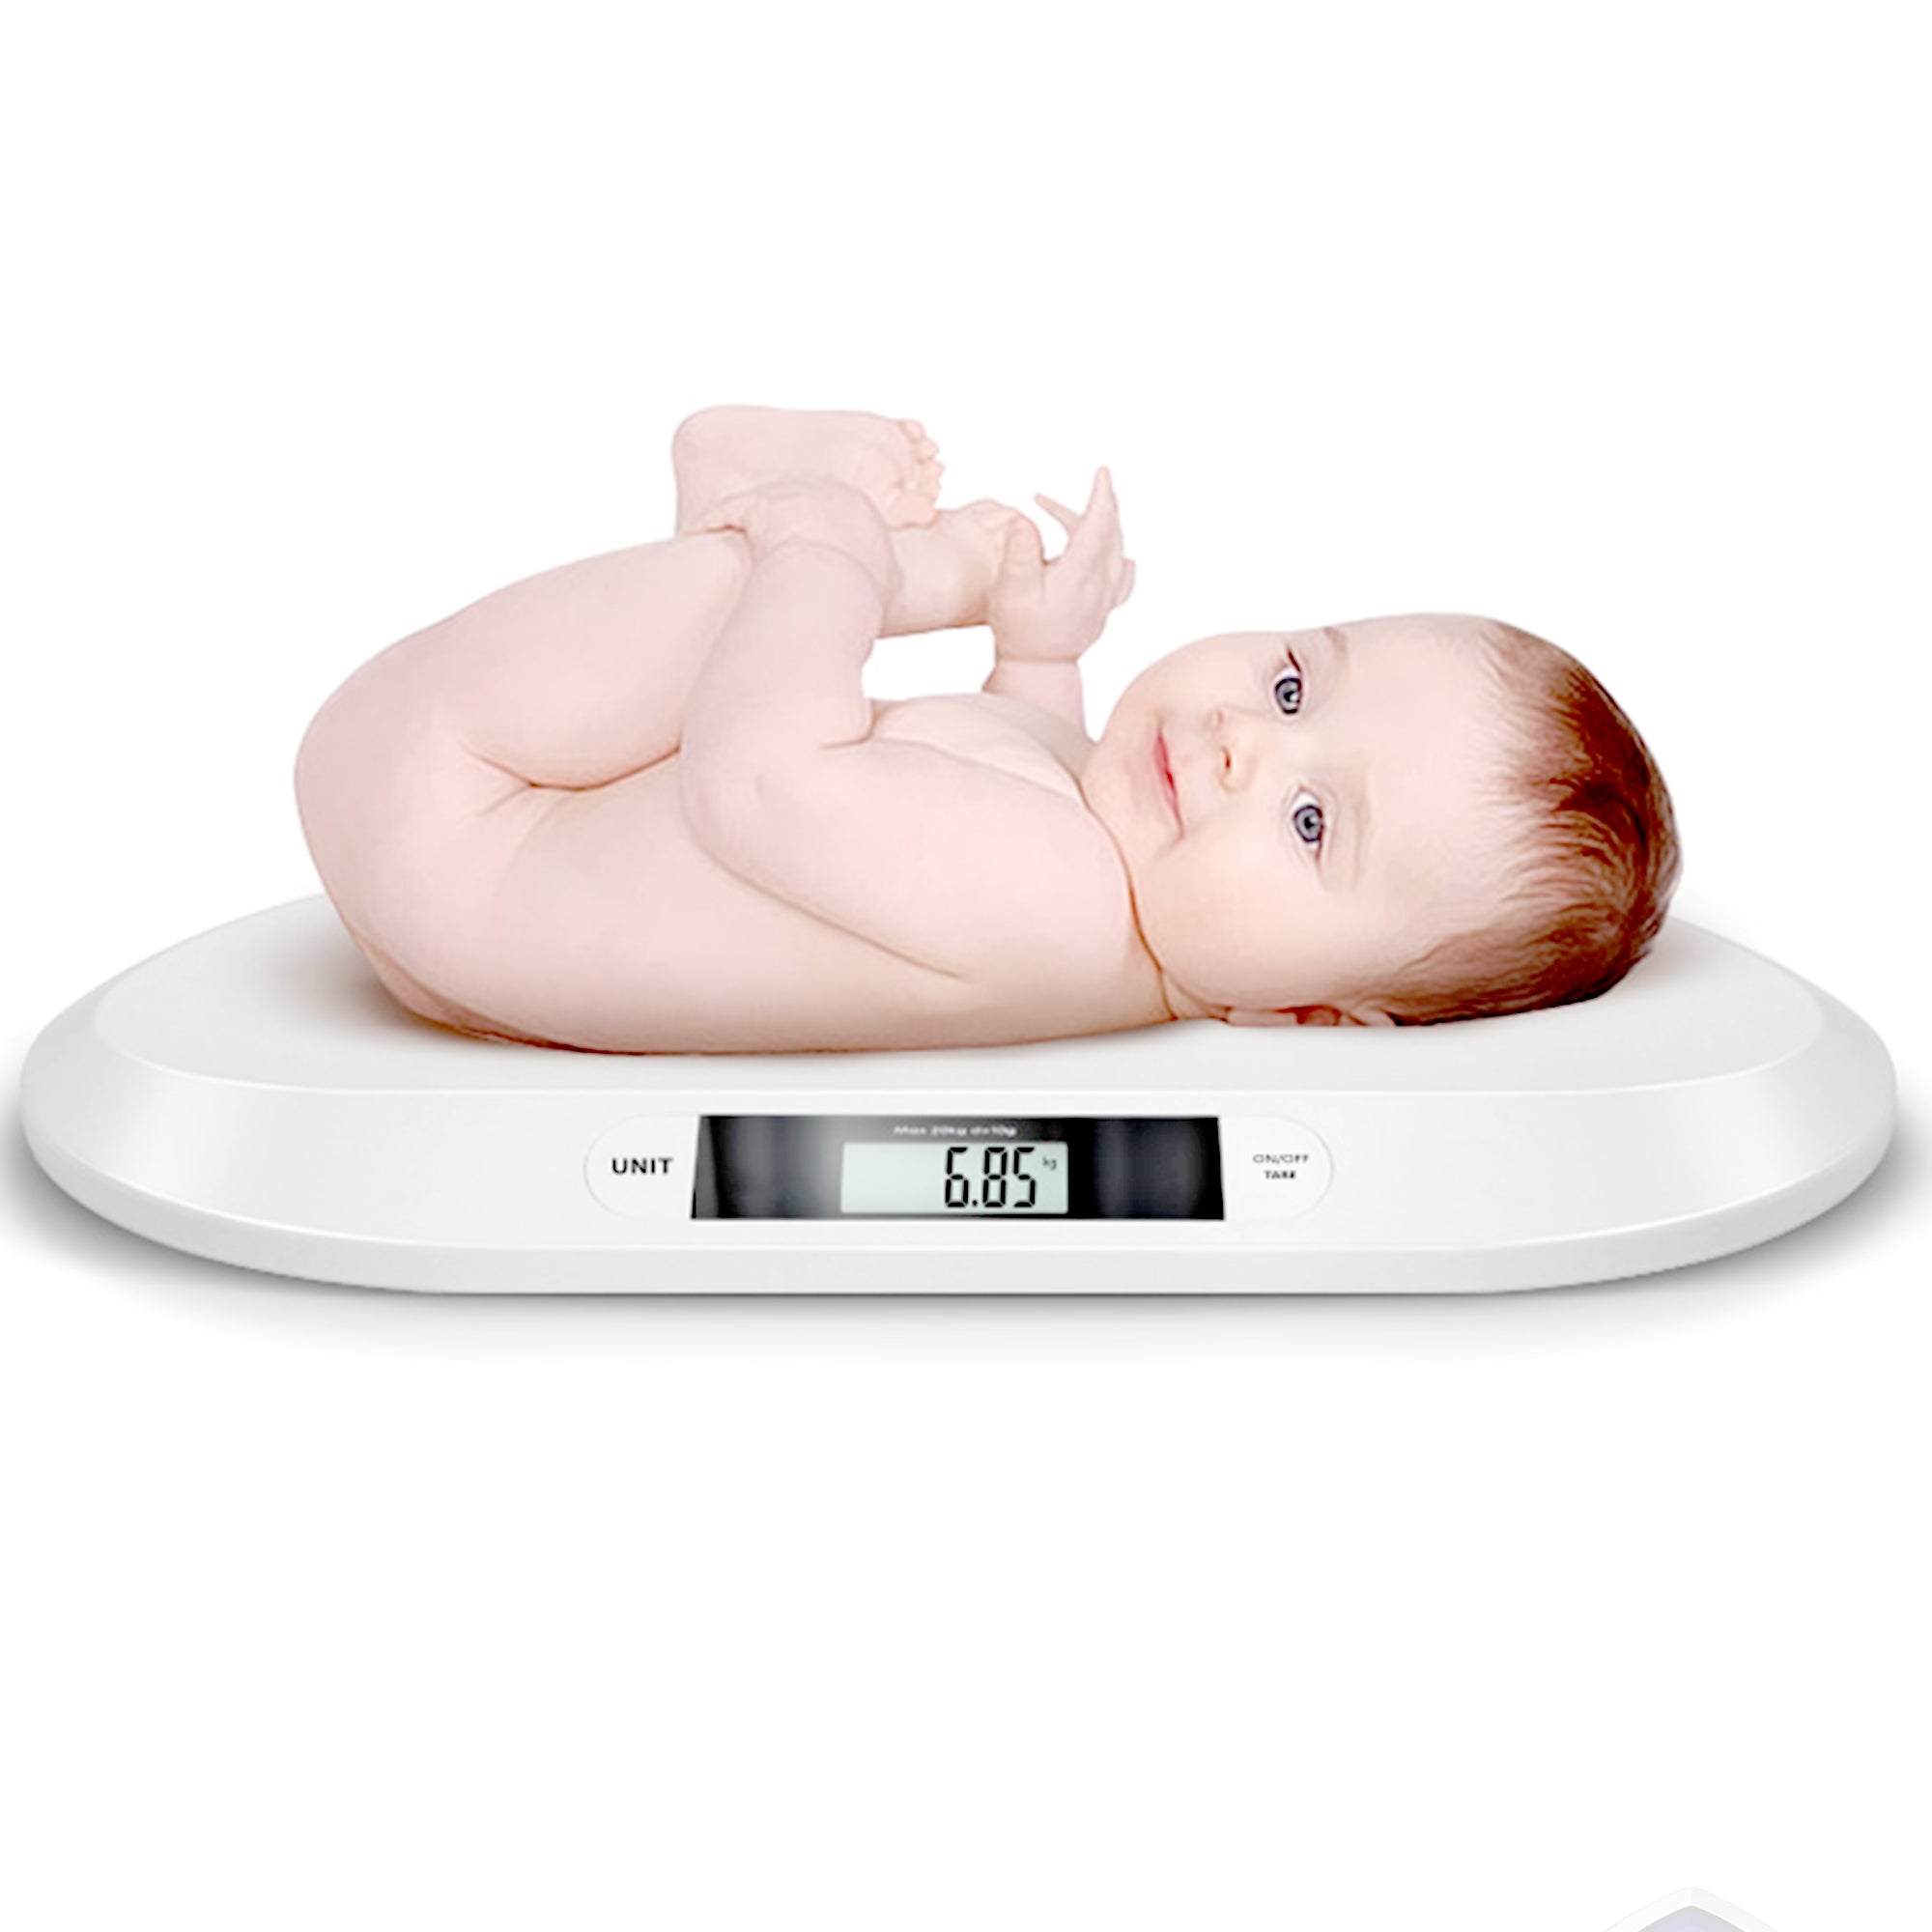 K-life WS-104 Digital Personal Baby Infant Toddler Weight Electronic Machine Weighing Scale